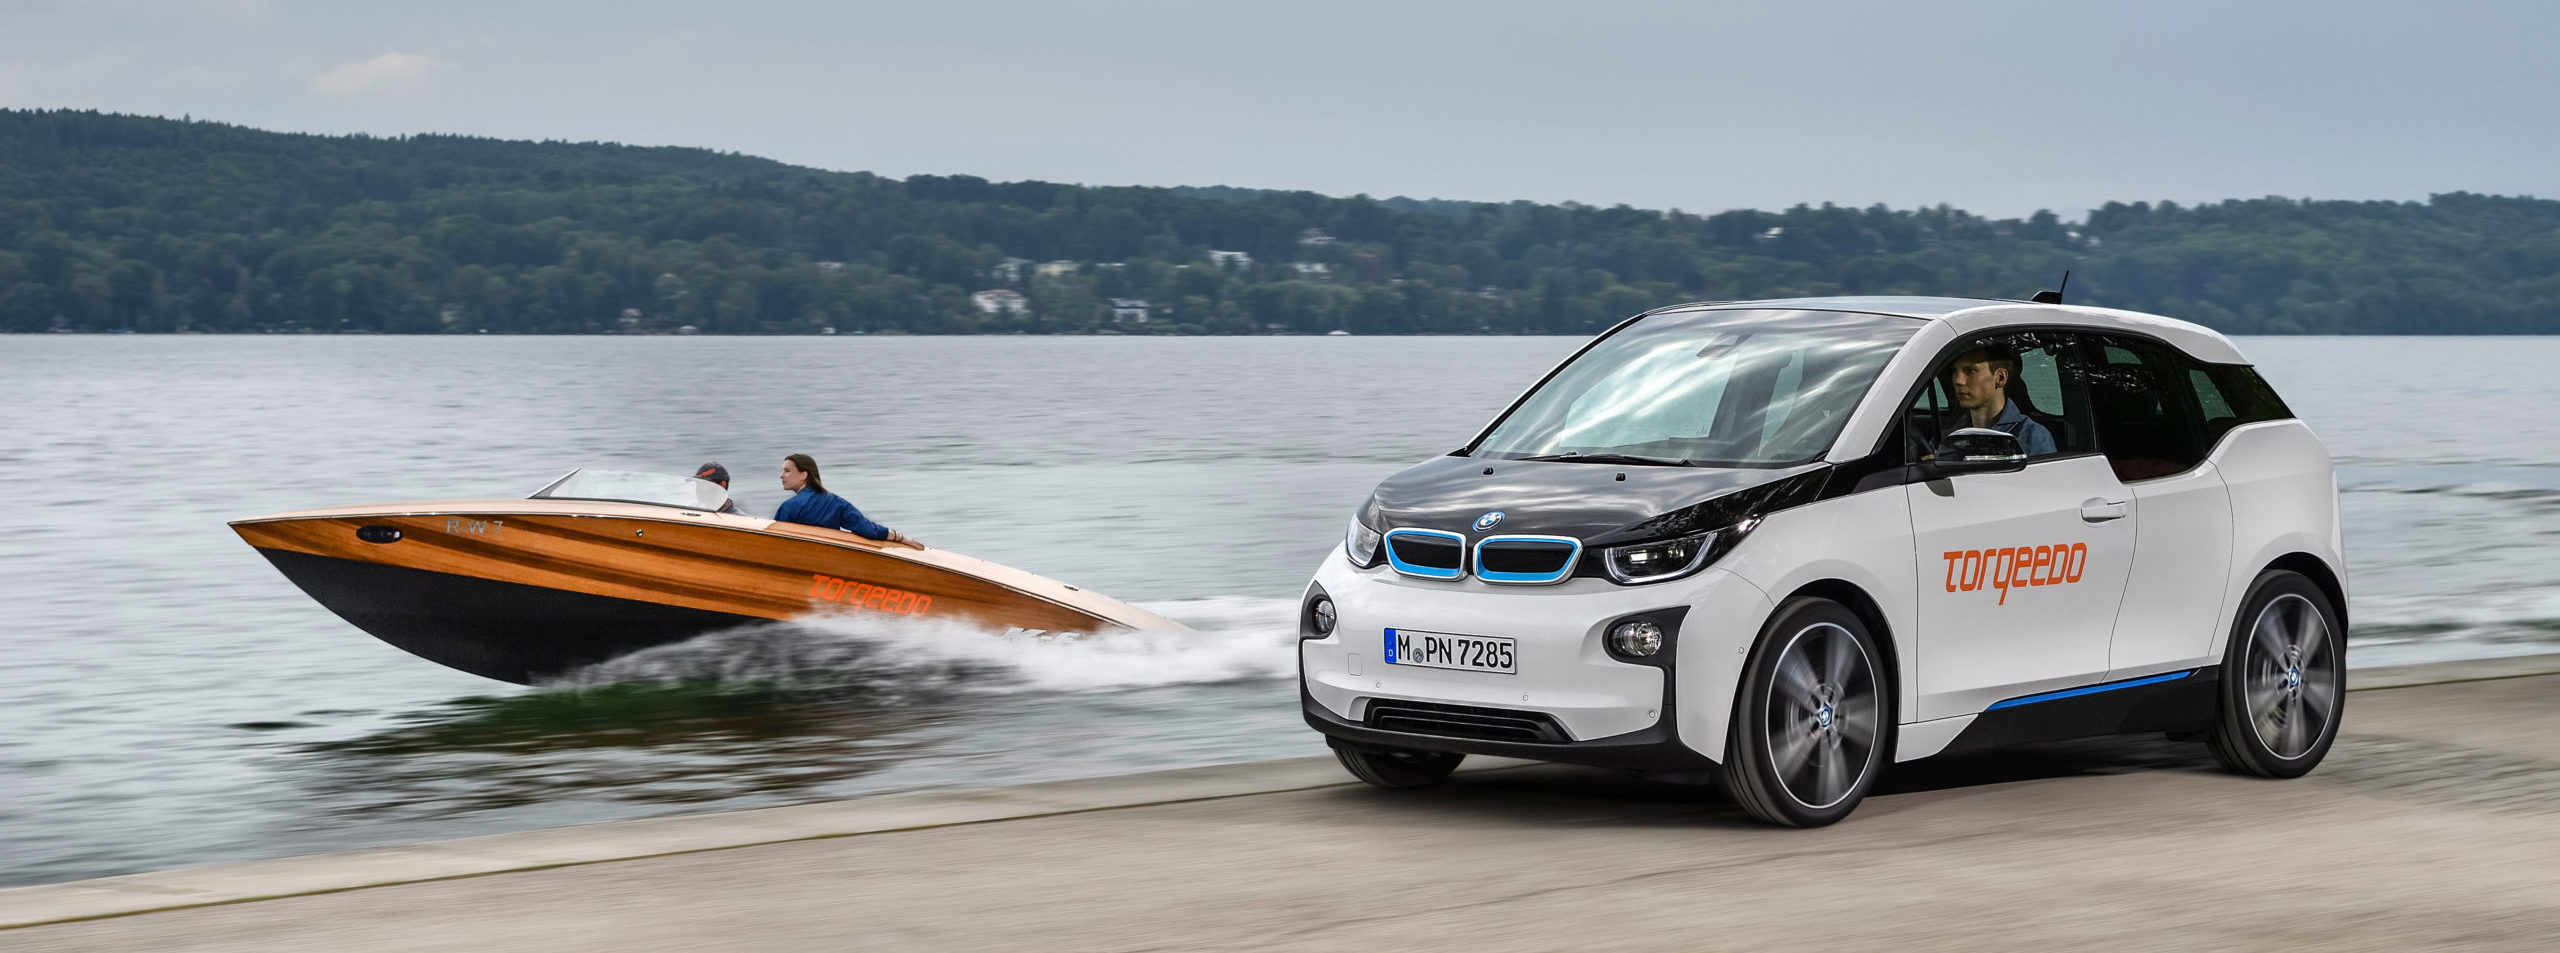 BMW 'Torqueedo' boat and the i3